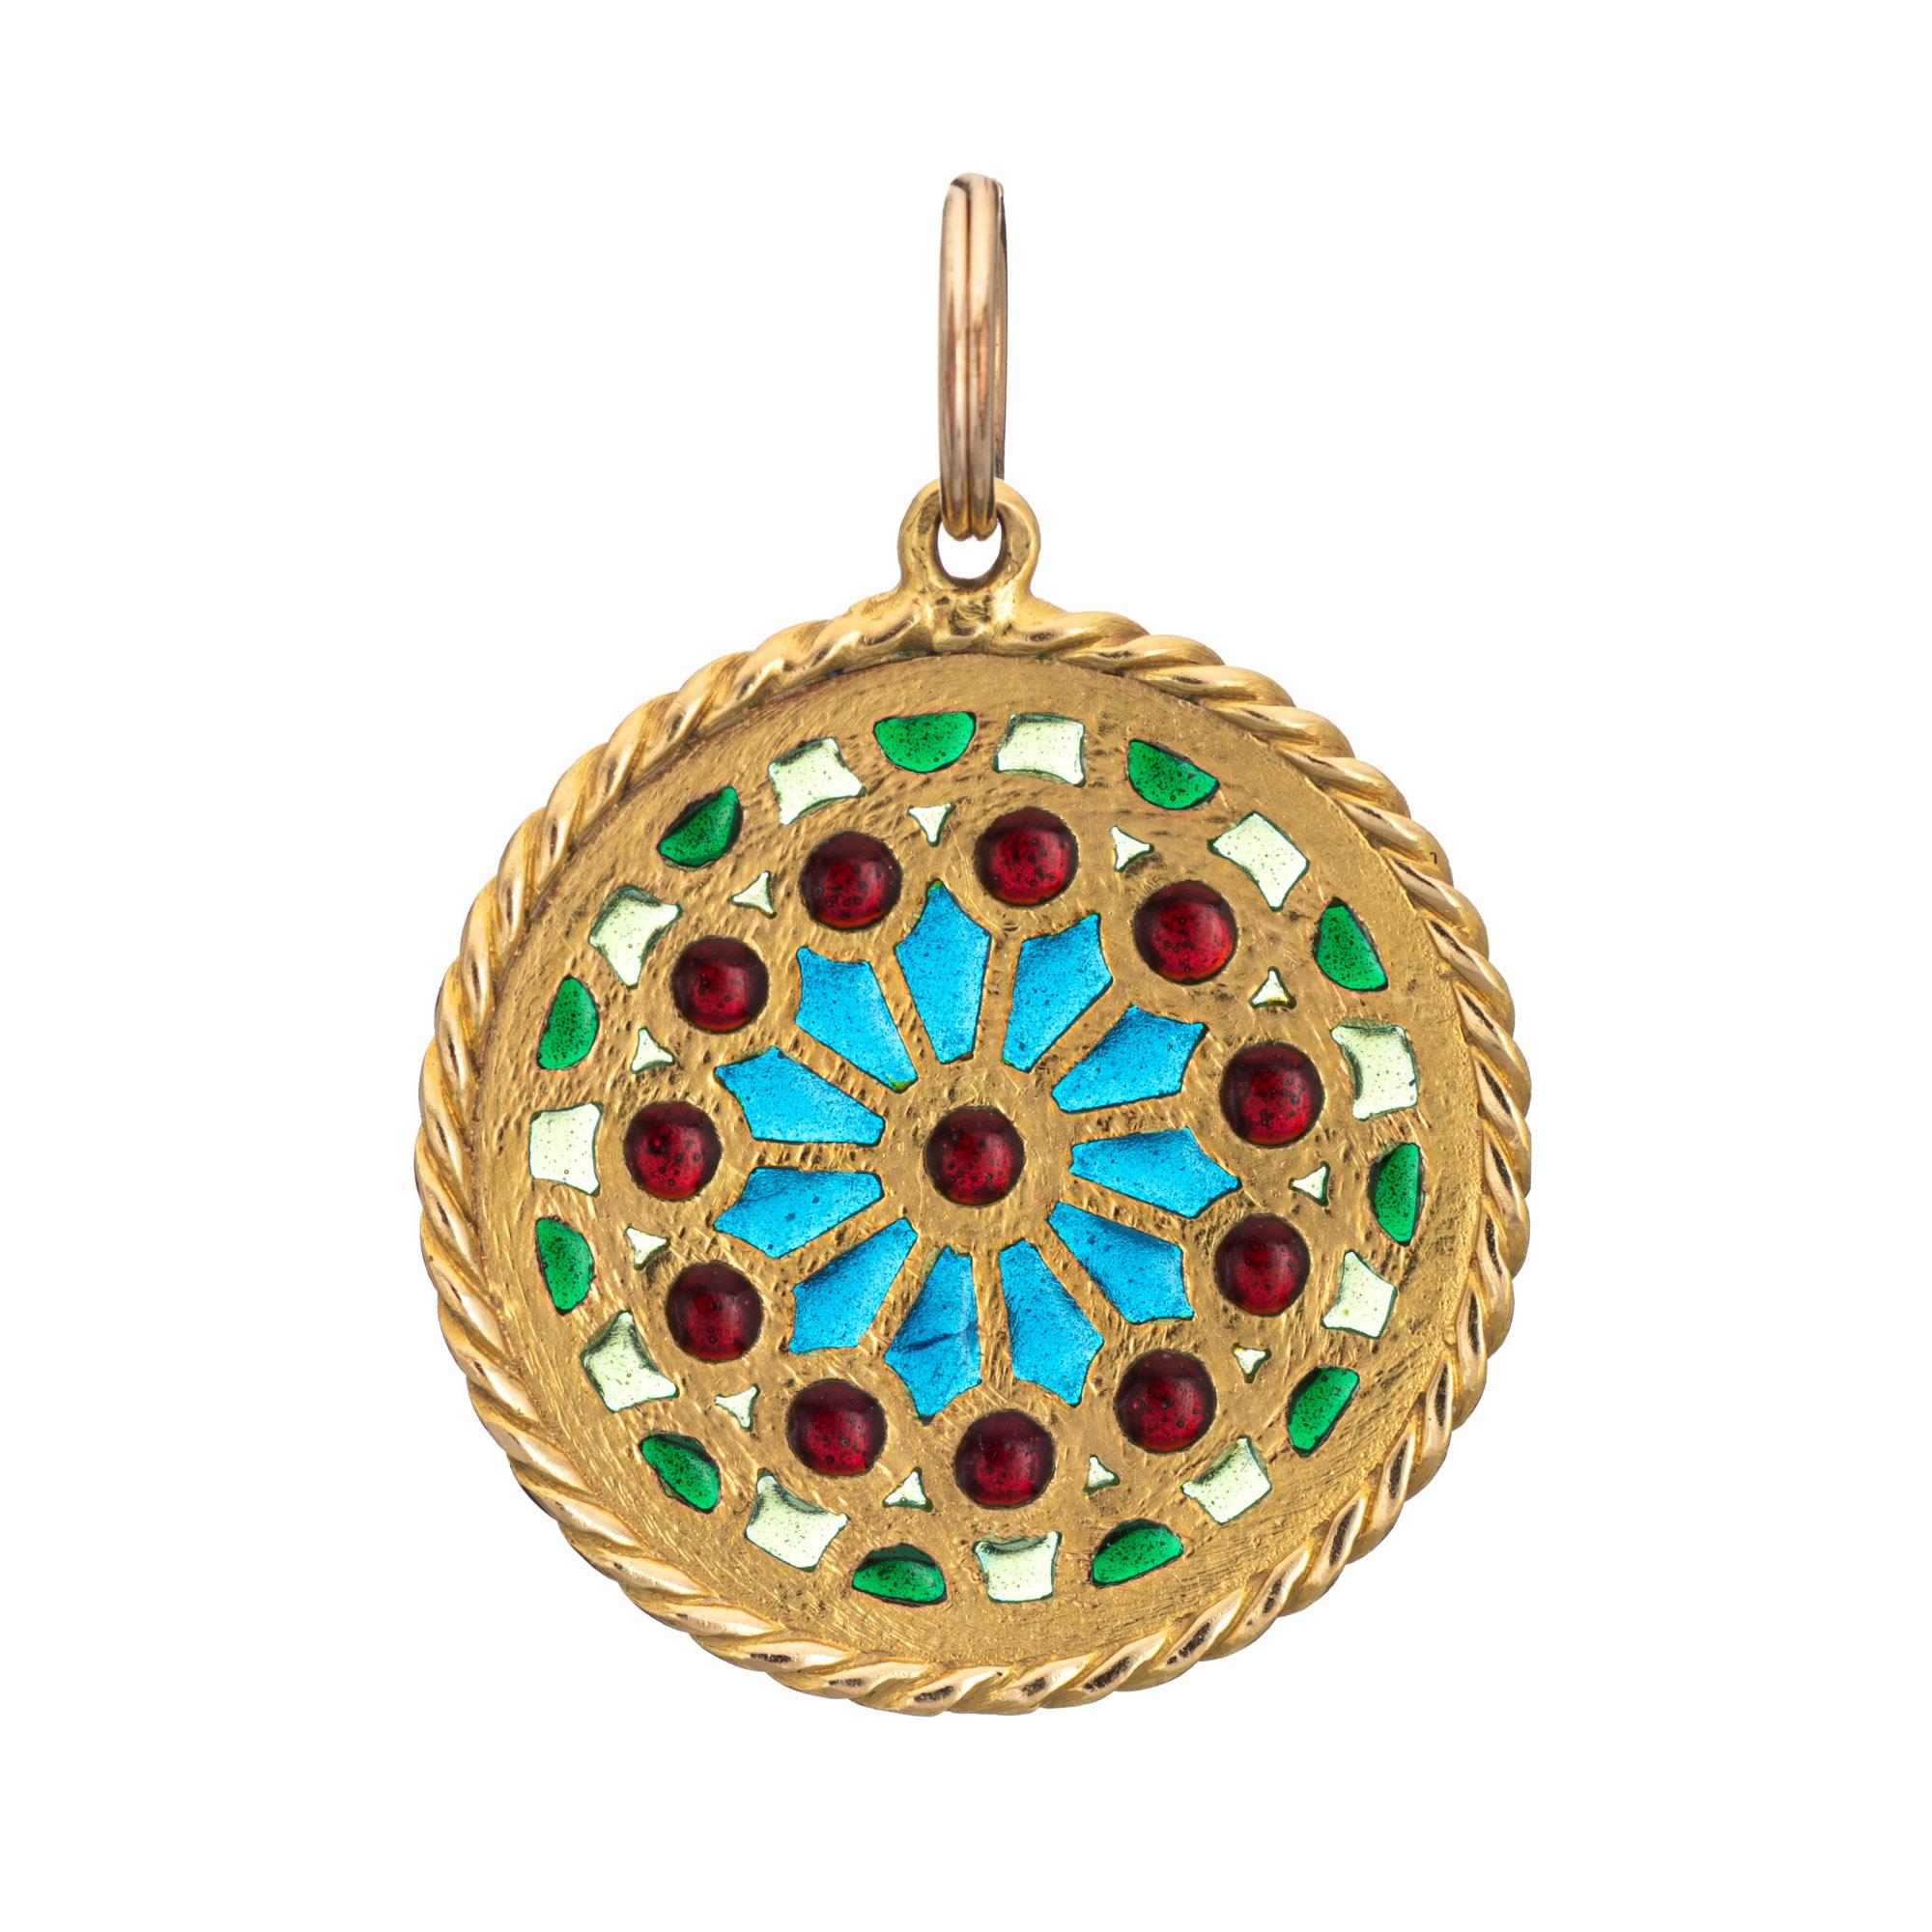 Finely detailed French plique a jour pendant (circa 1920s to 1930s), crafted in 18 karat yellow gold.

A kaleidoscope of colors adorn the pendant in shades of red, blue and green.
 
Plique a jour is a French term for 'letting in daylight'. The